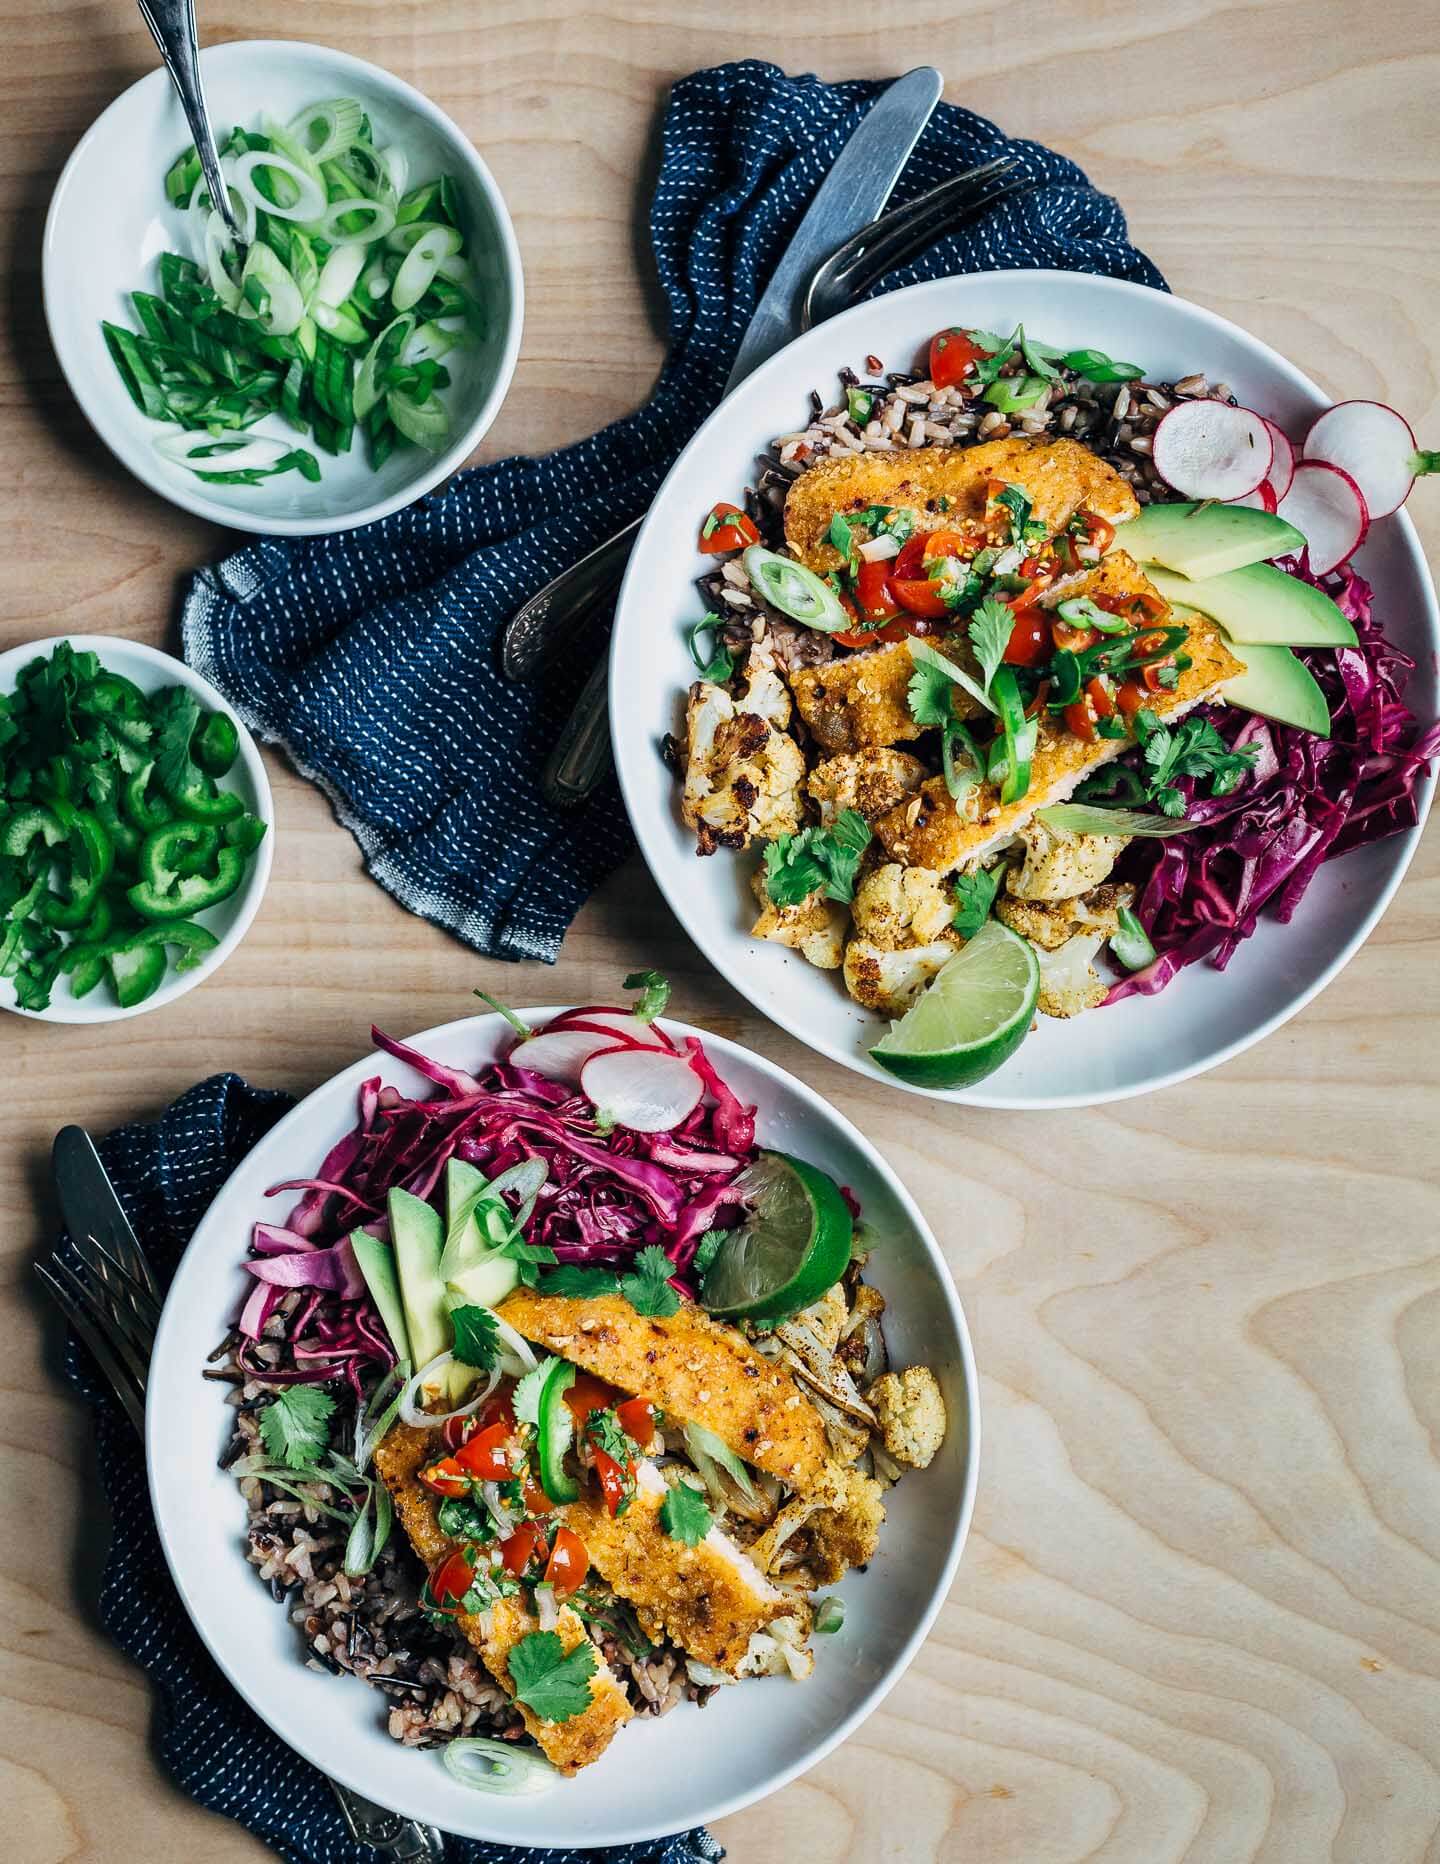 Vibrant honey-chipotle salmon taco bowls with wild rice, roasted cauliflower, cilantro, and a fresh cherry tomato and jalapeño relish. These simple salmon taco bowls are perfect for a quick and easy weeknight meal.